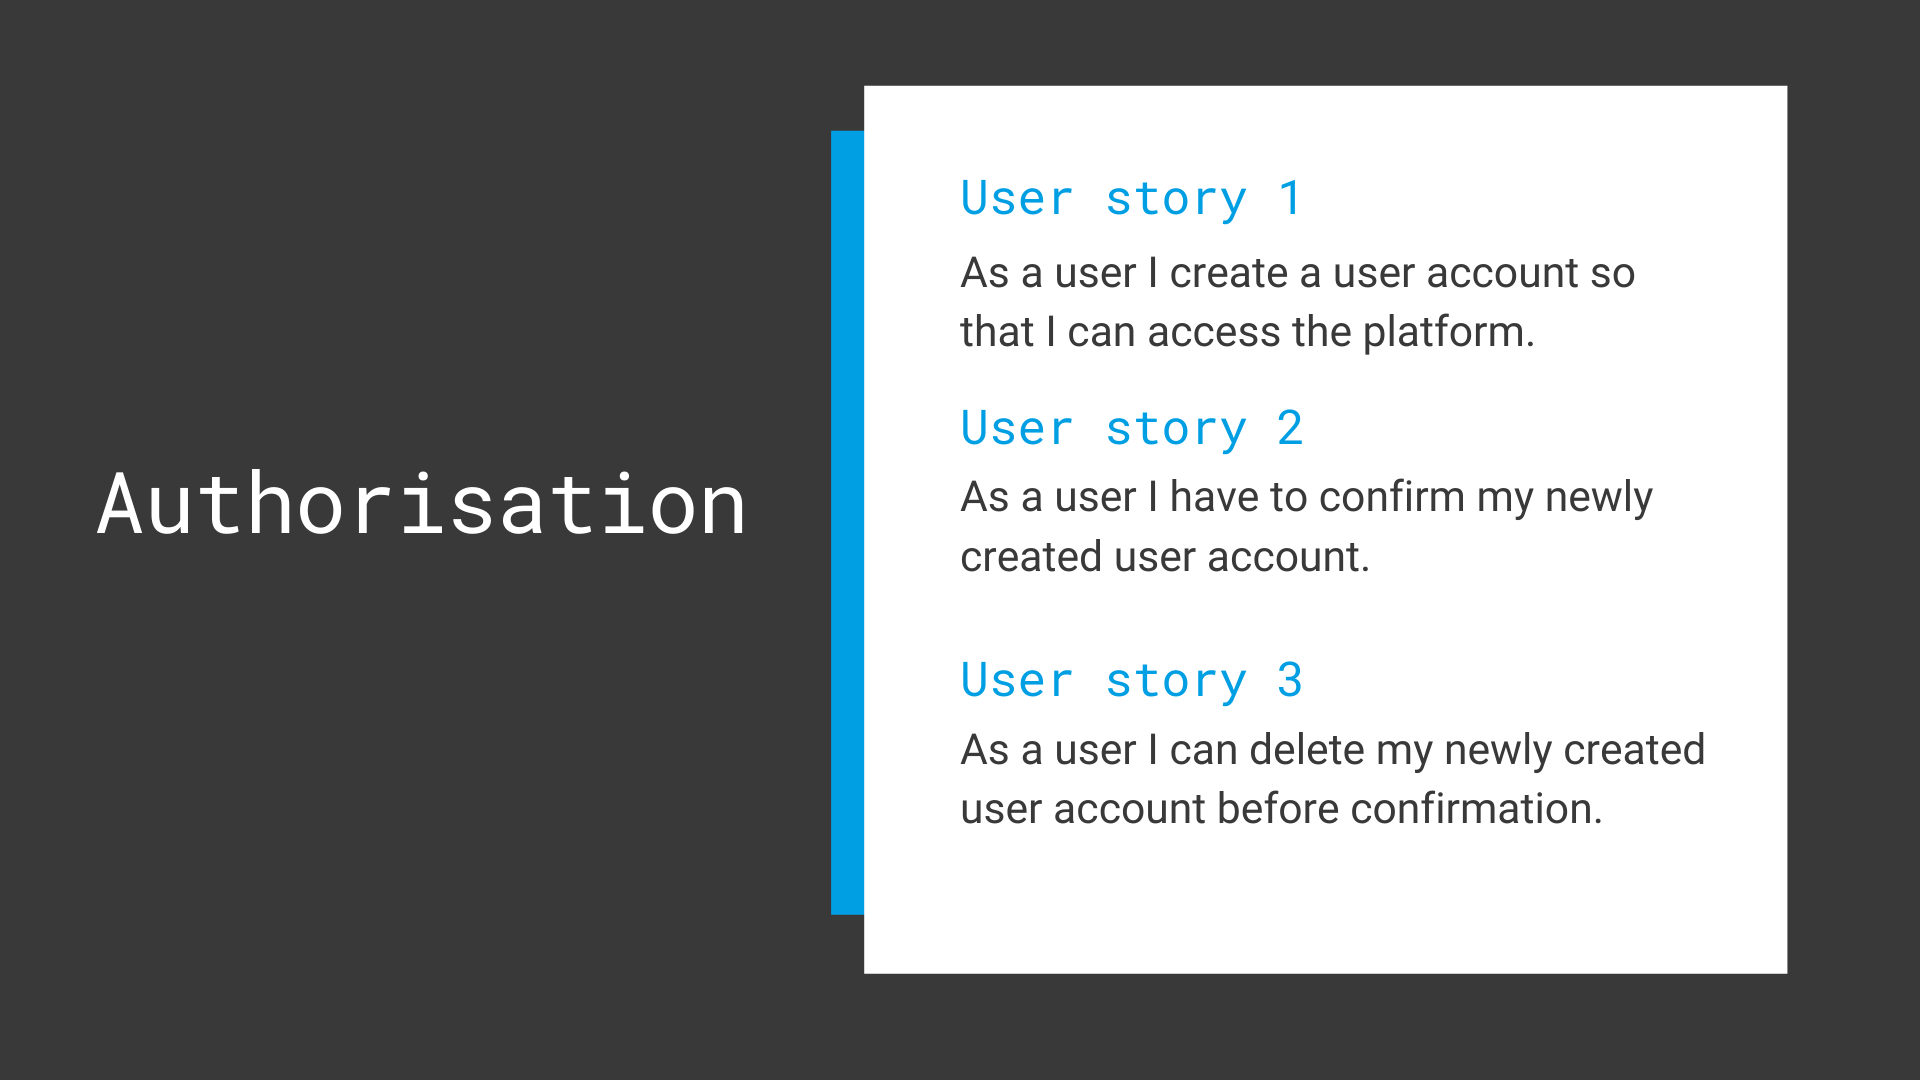 user stories examples for the authorisation feature